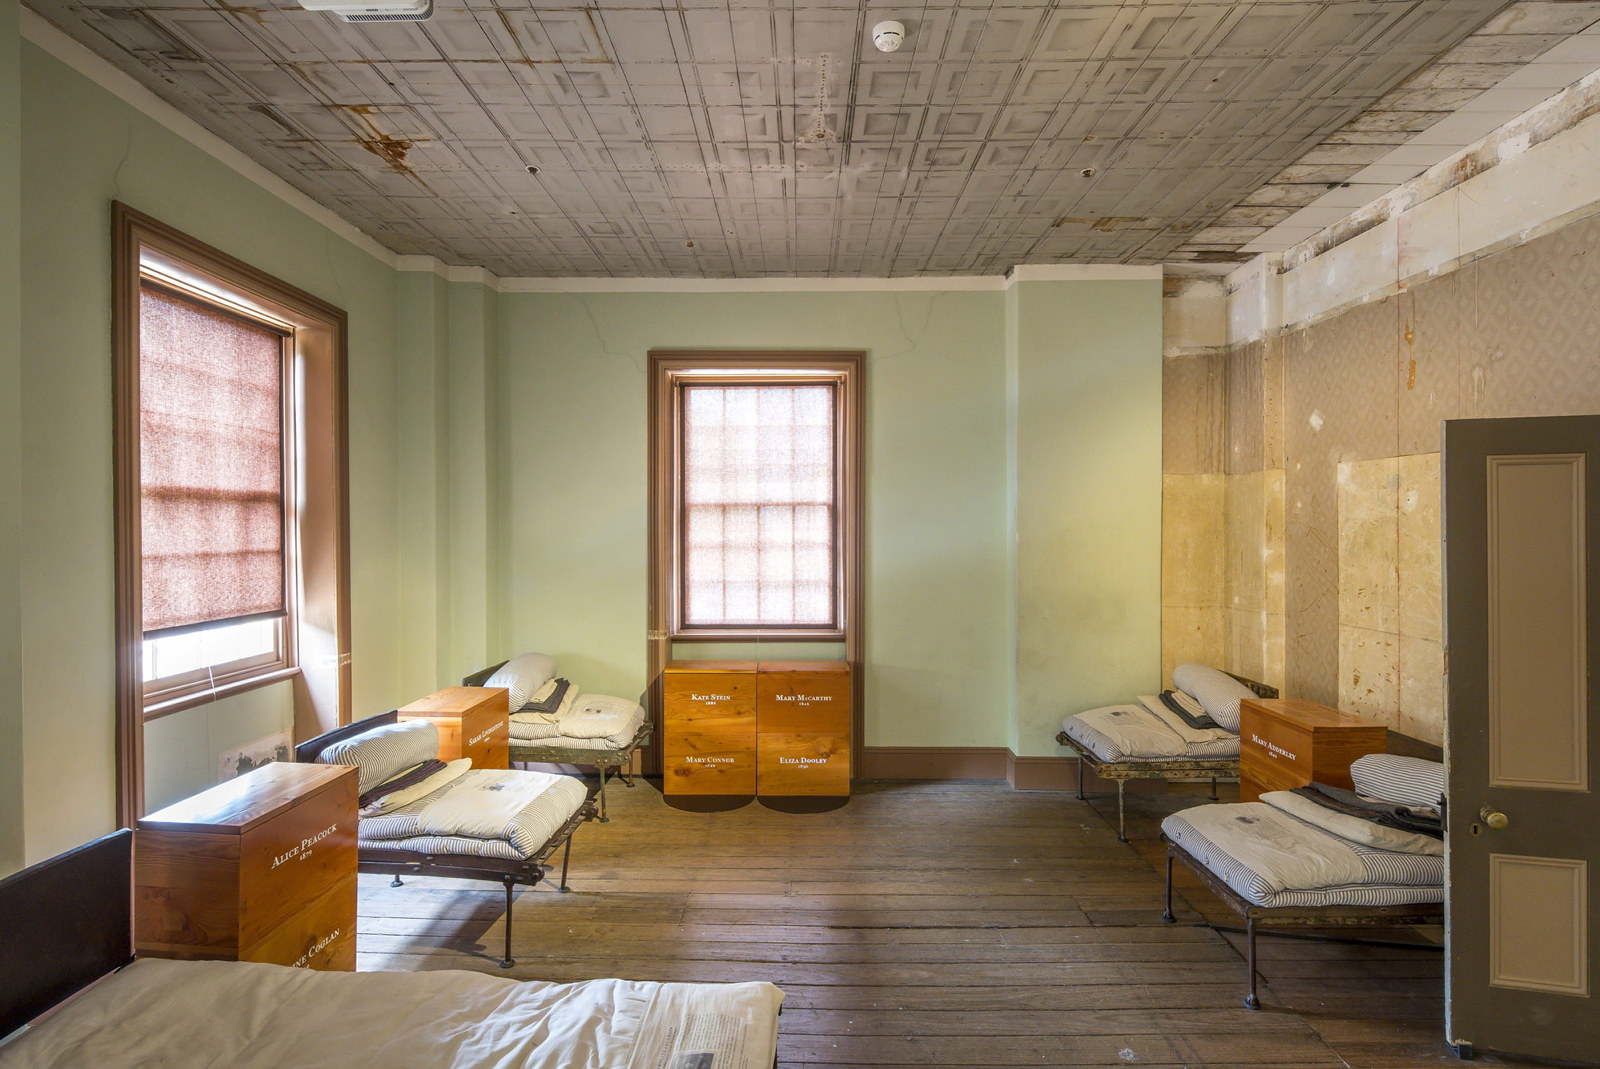 Room with wooden floor, green walls and windows to left, with simple beds made up to represent dormitory.